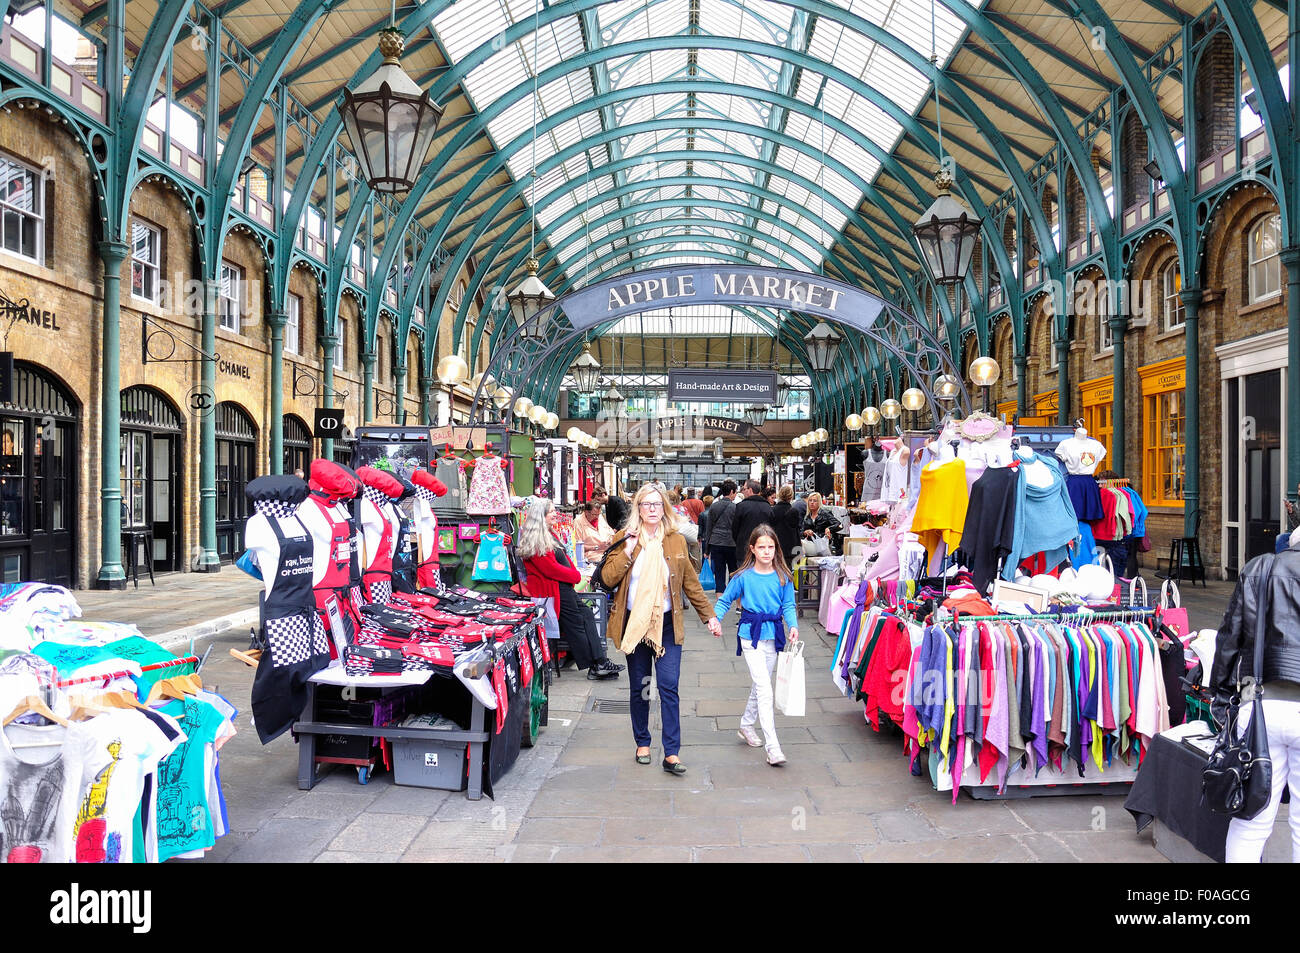 Apple Market in Covent Garden Market, Covent Garden, City of Westminster, London, England, United Kingdom Stock Photo